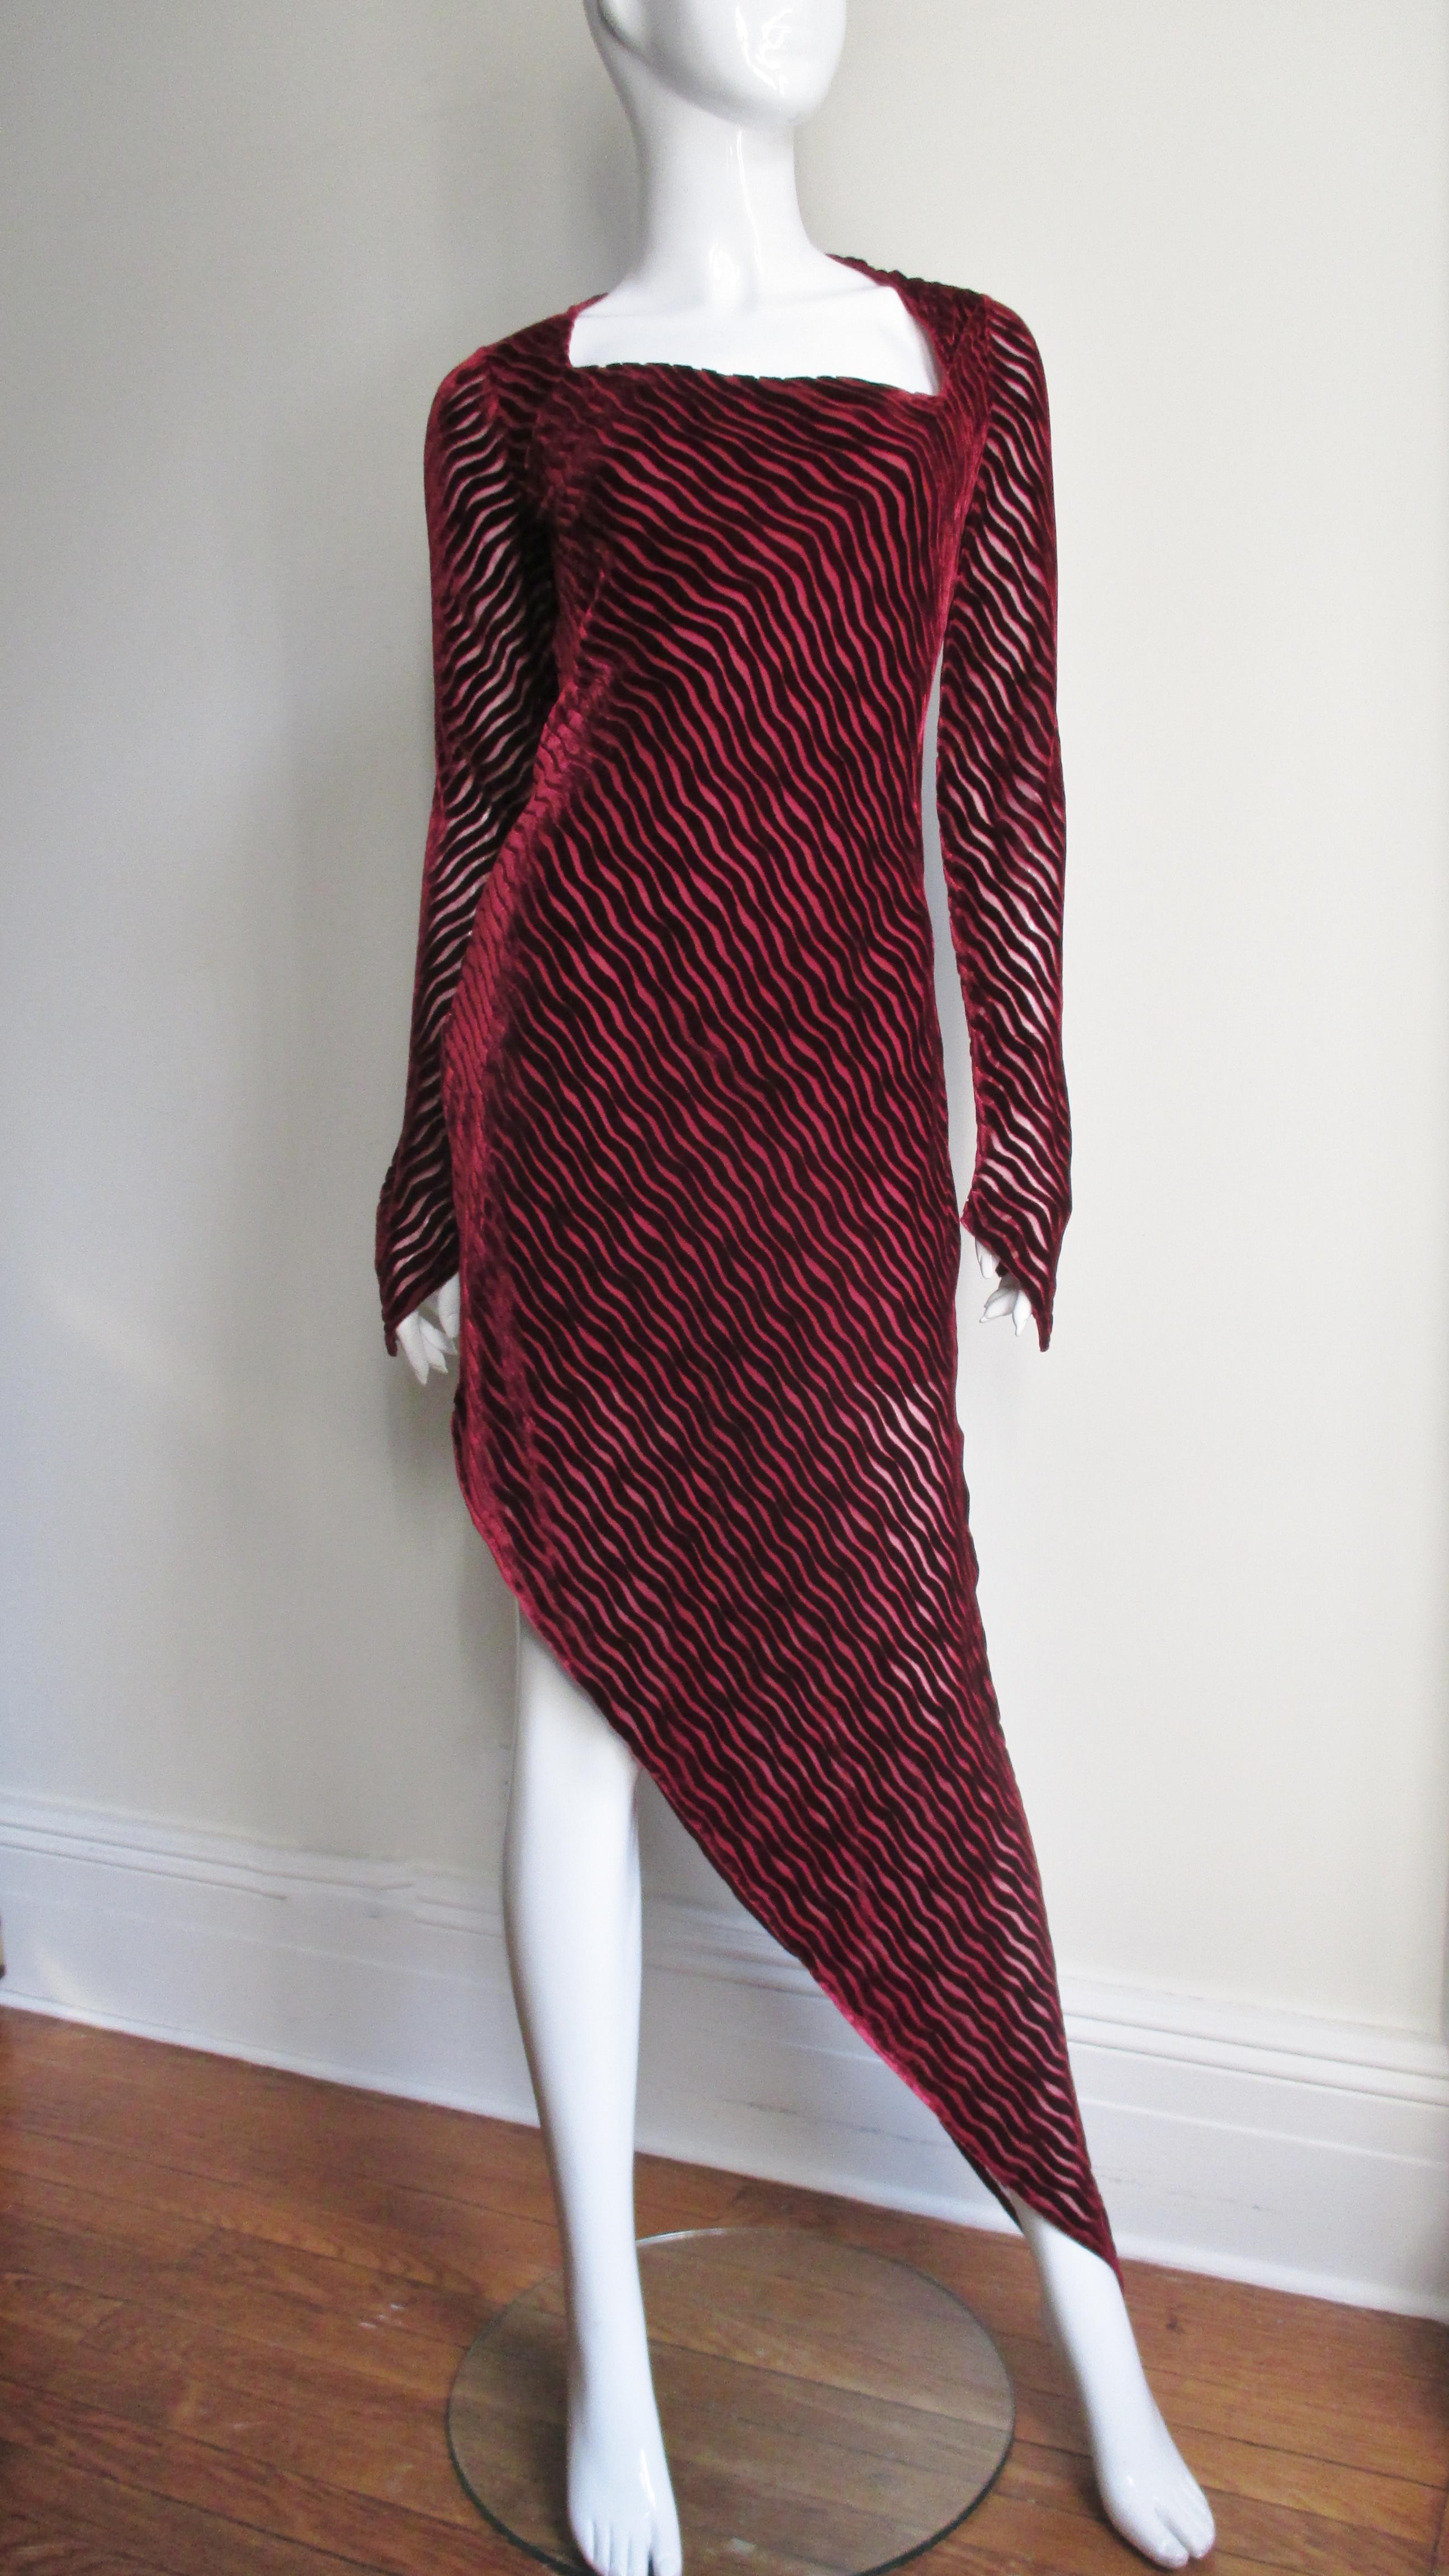 A fabulous dress from Karl Lagerfeld in burnout Bordeaux silk velvet alternating wavy lines with sheer.  It has an asymmetric square neckline, long sleeves with pointed cuffs over the hands and a hemline cut at an angle.  It has a matching side